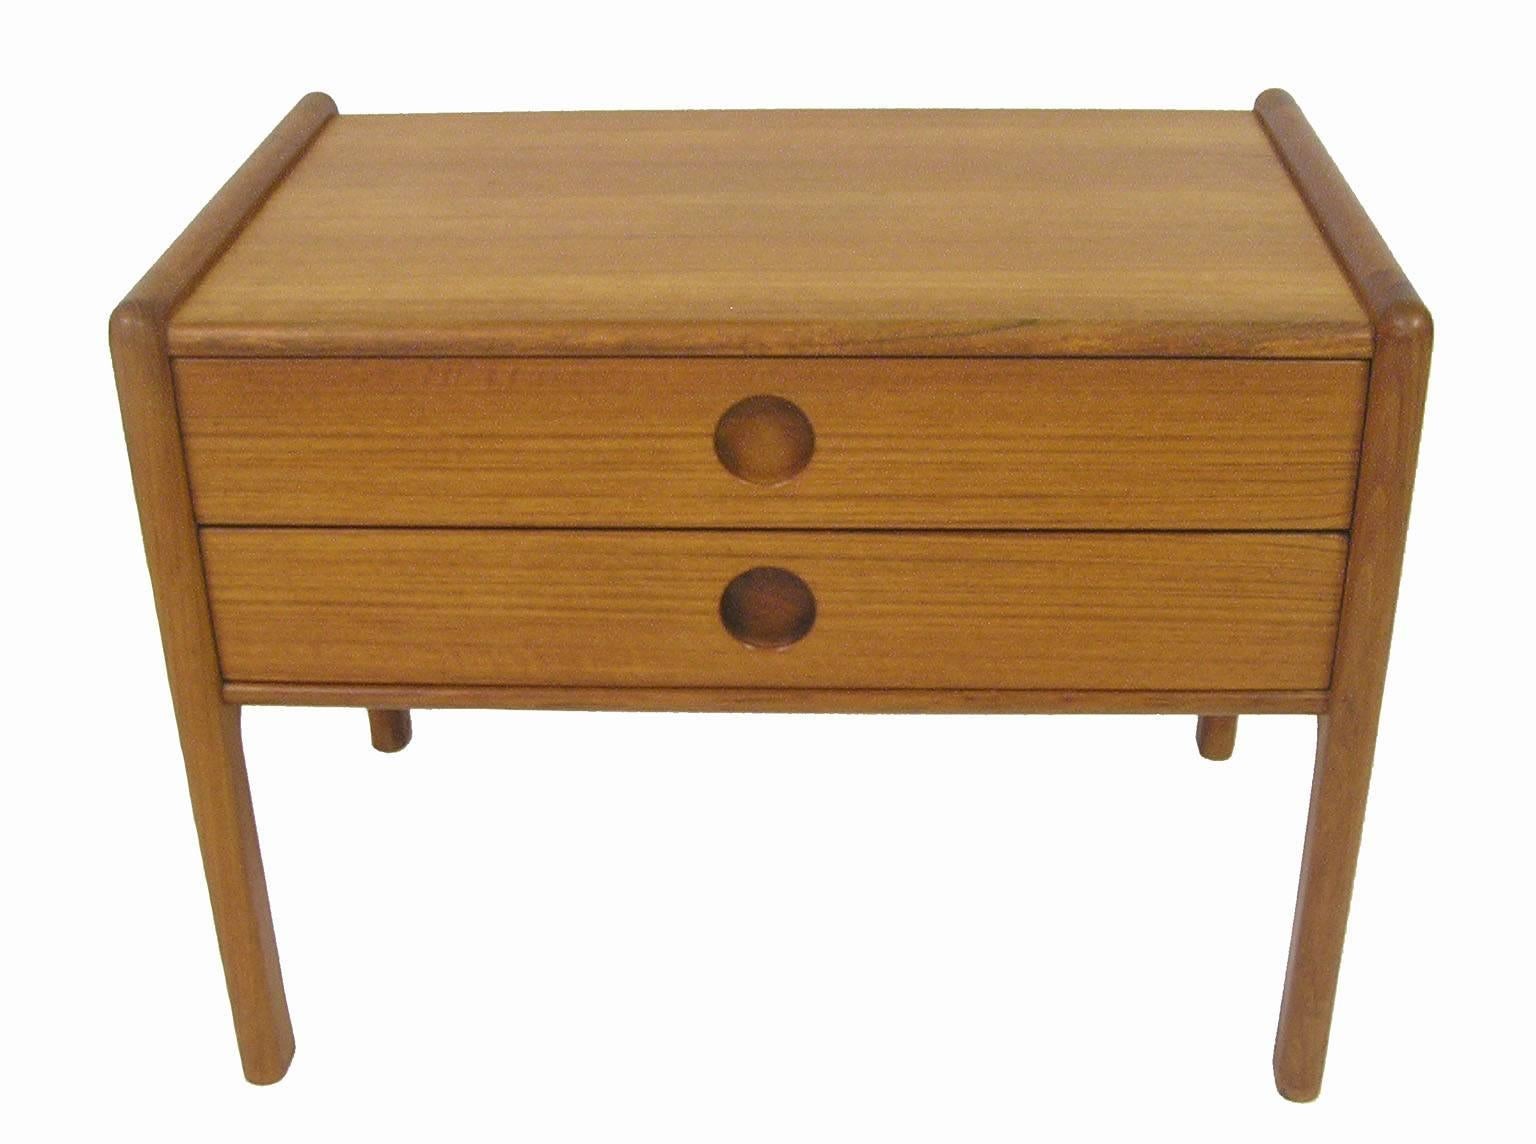 A beautiful two-drawer teak chest from the 1960s Danish modern era. Designed by Kai Kristiansen for Vildbjerg Mobelfabrik of Denmark. Stylish compact size with inset elliptical pulls and dovetailed drawer joinery. A Classic example of Scandinavian